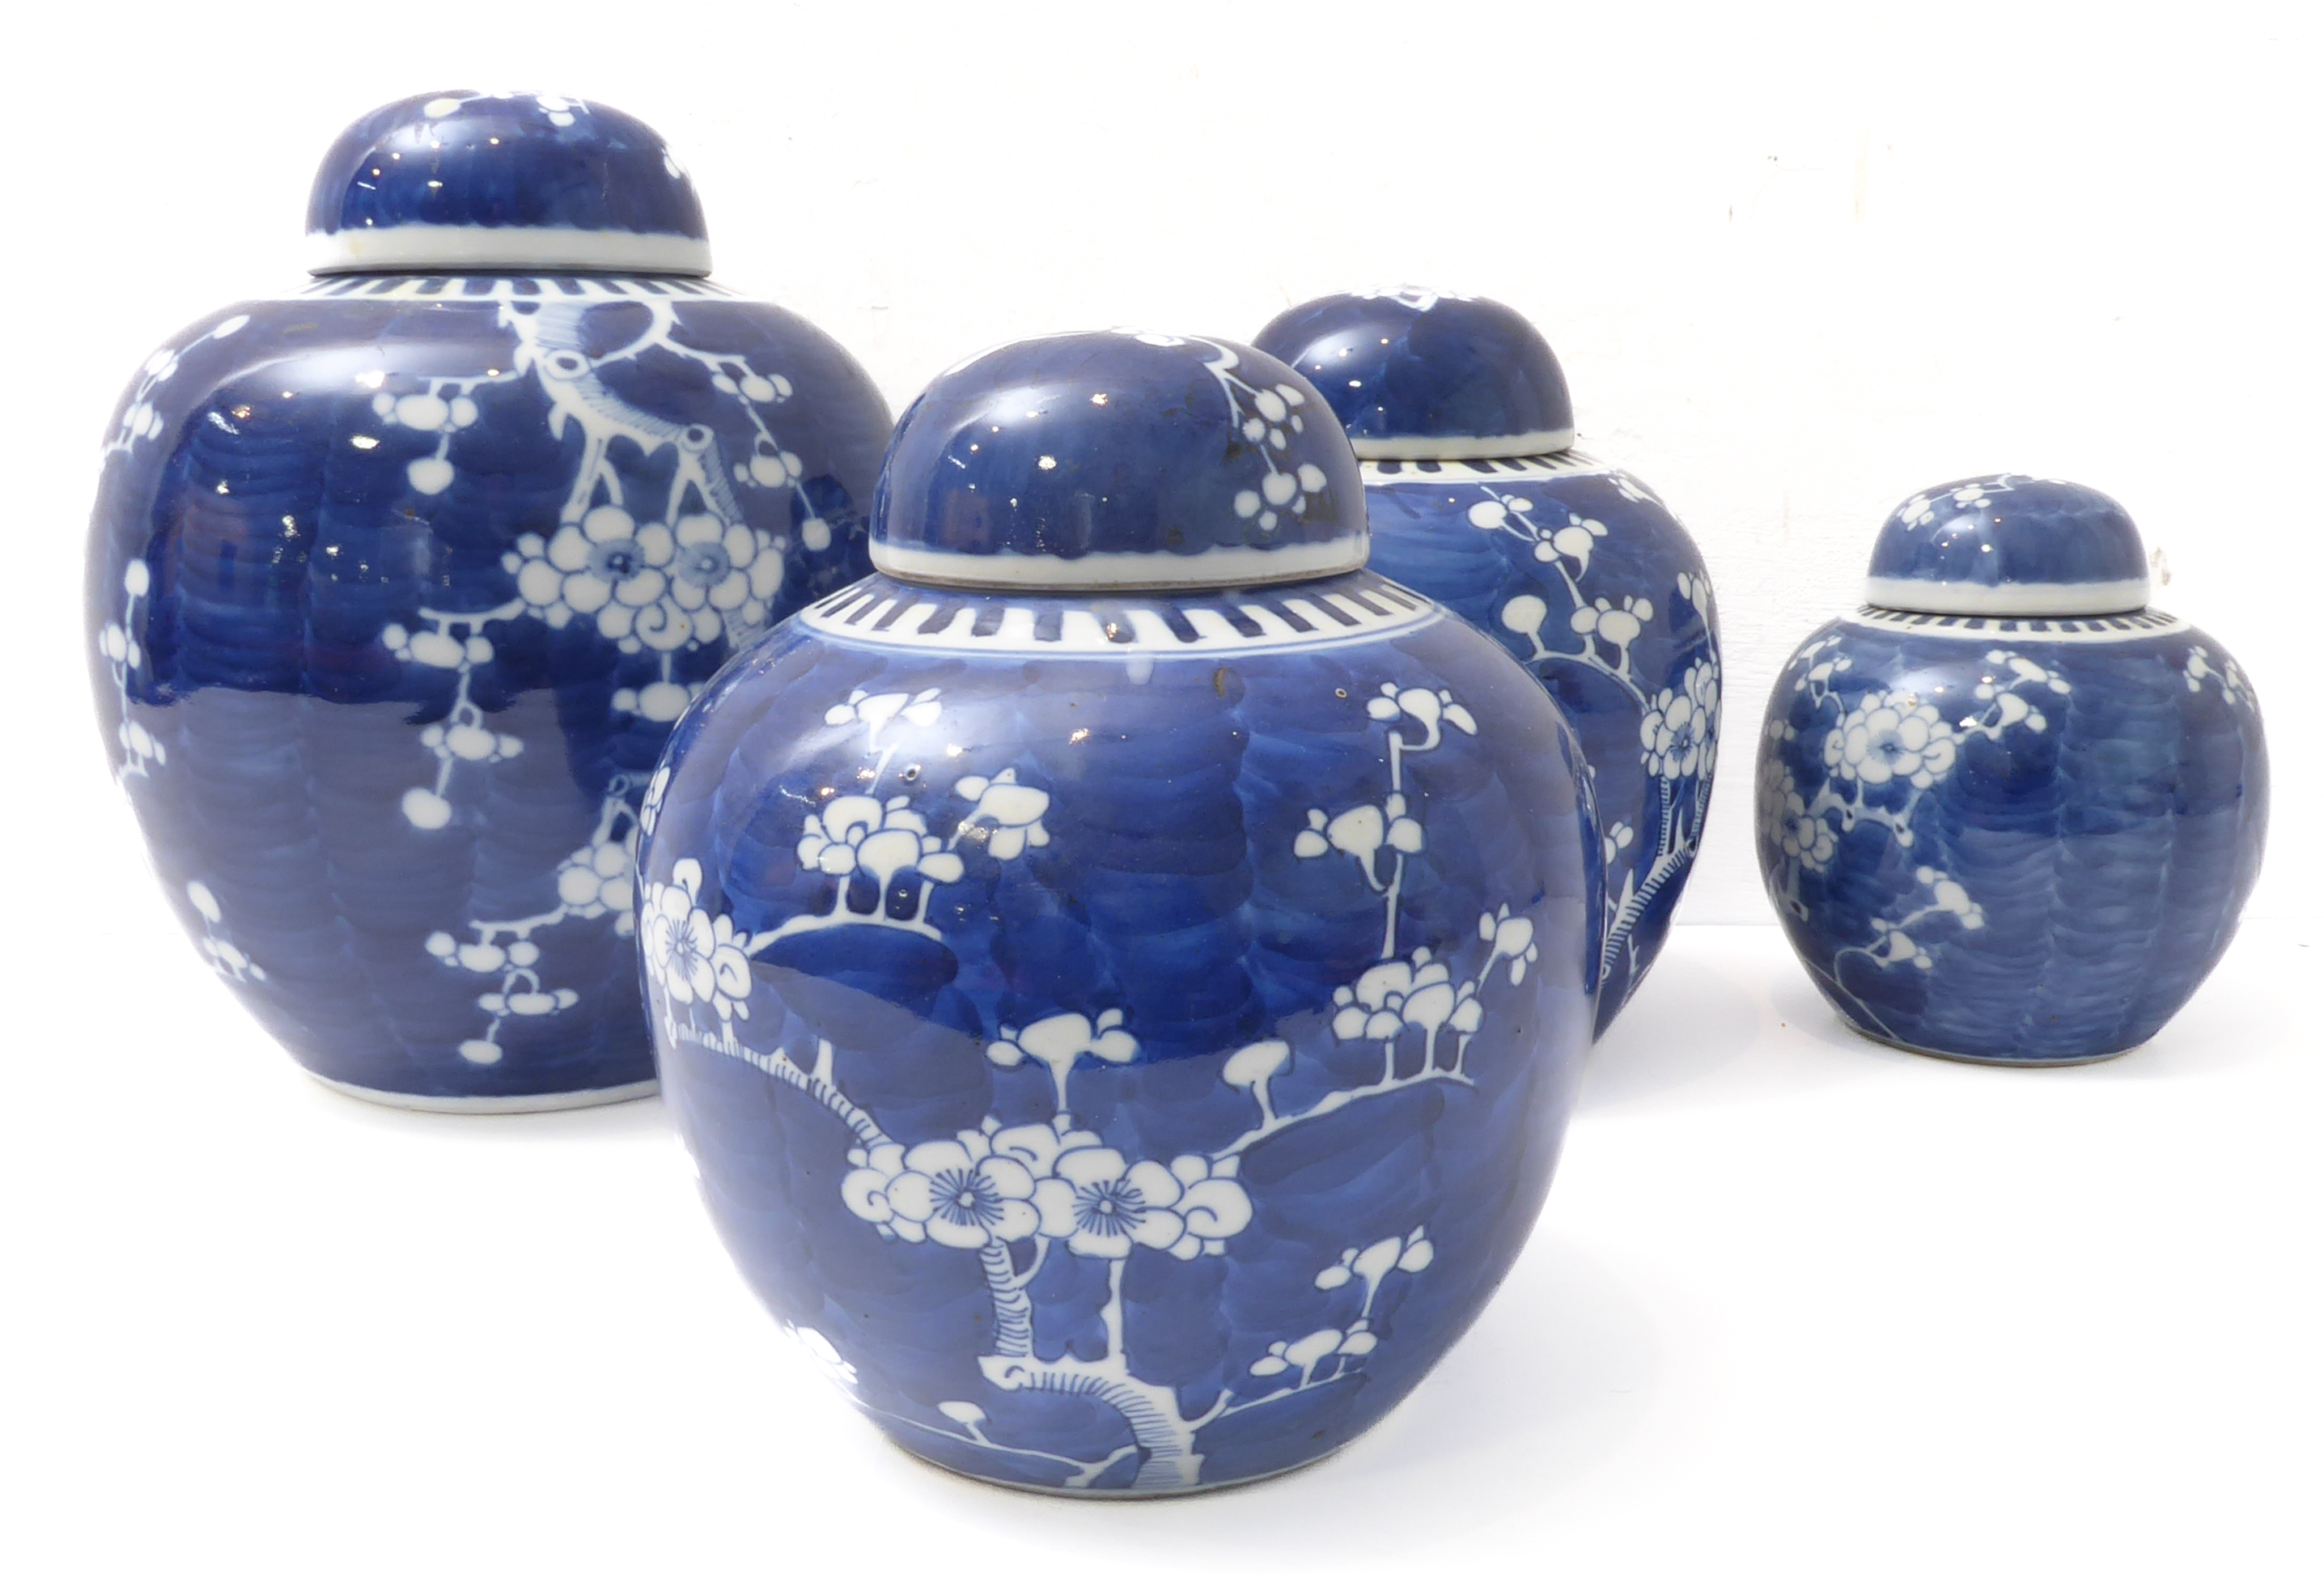 Four Chinese ginger jars and covers – varying sizes, decorated in underglaze blue and white with